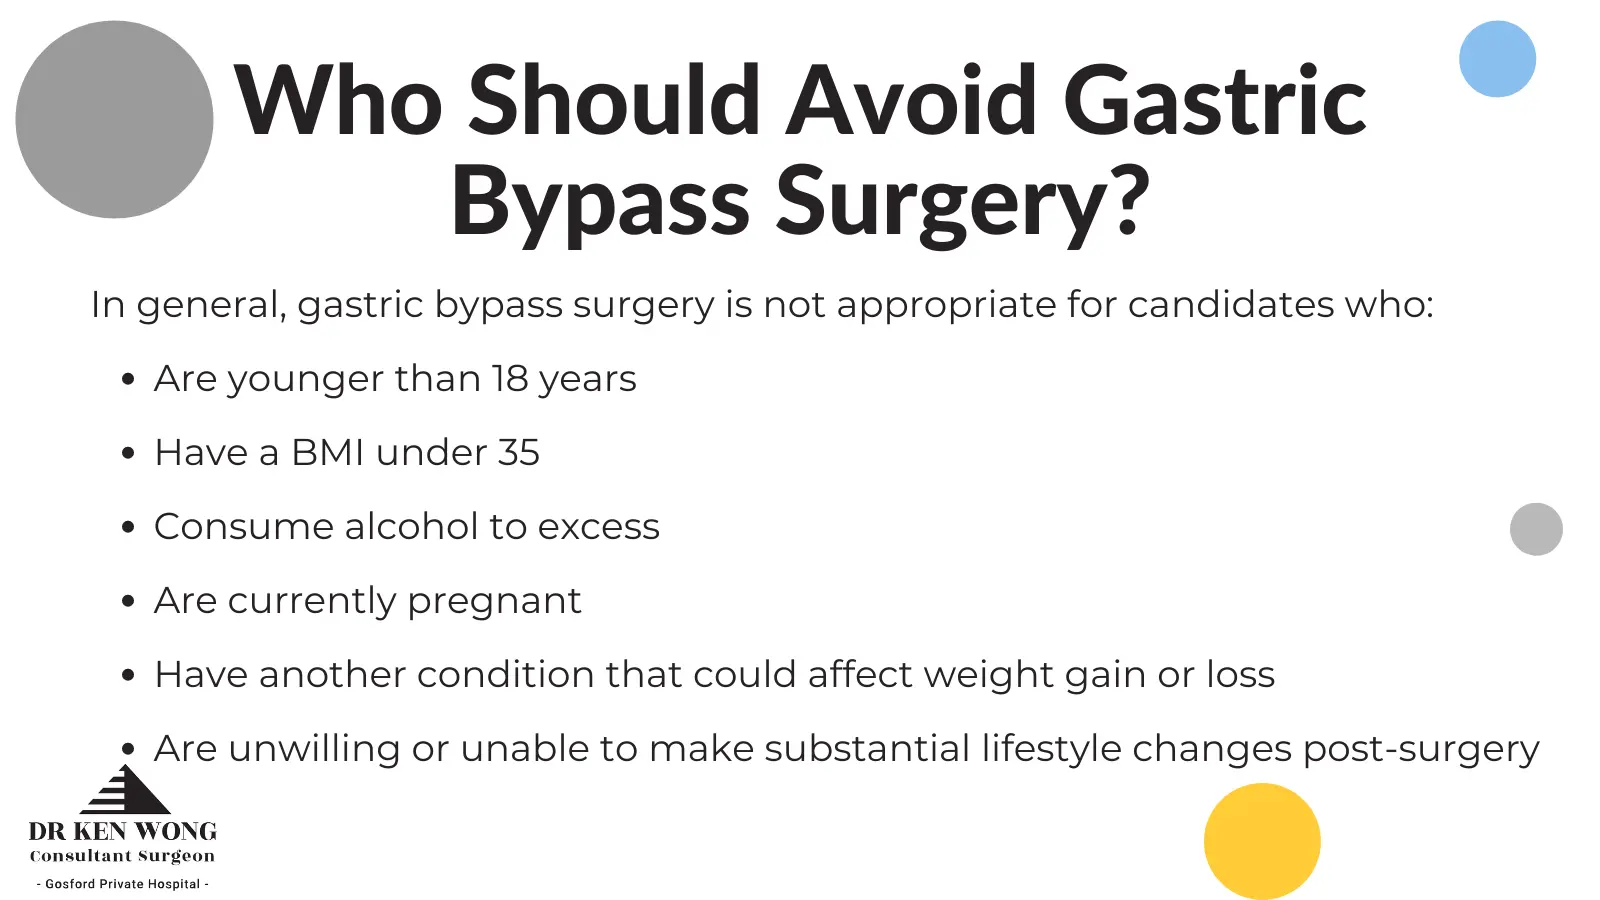 Candidates for Gastric Bypass Surgery